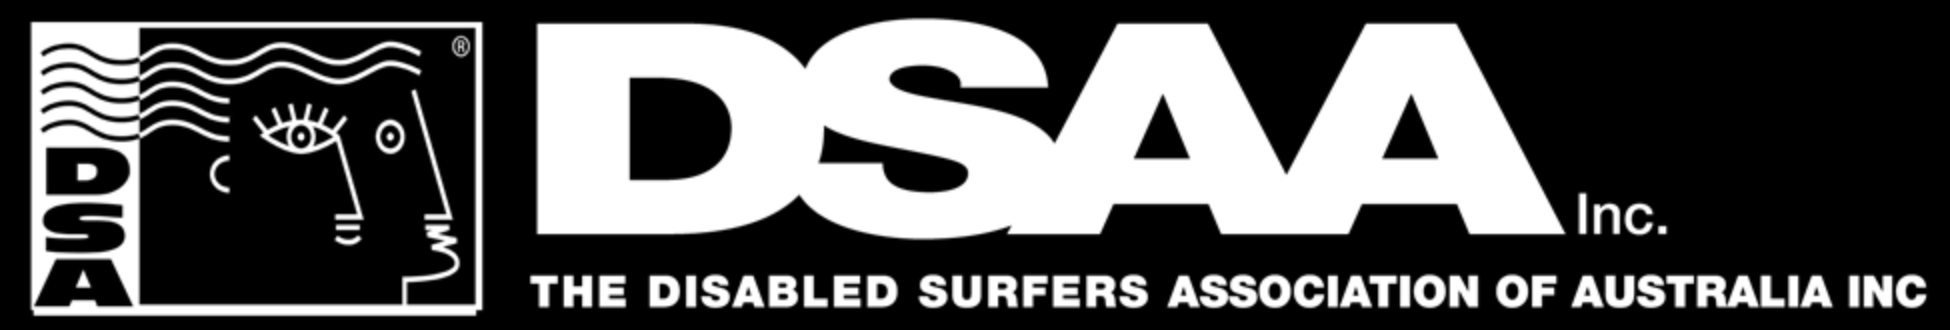 The Disabled Surfers Association of Australia